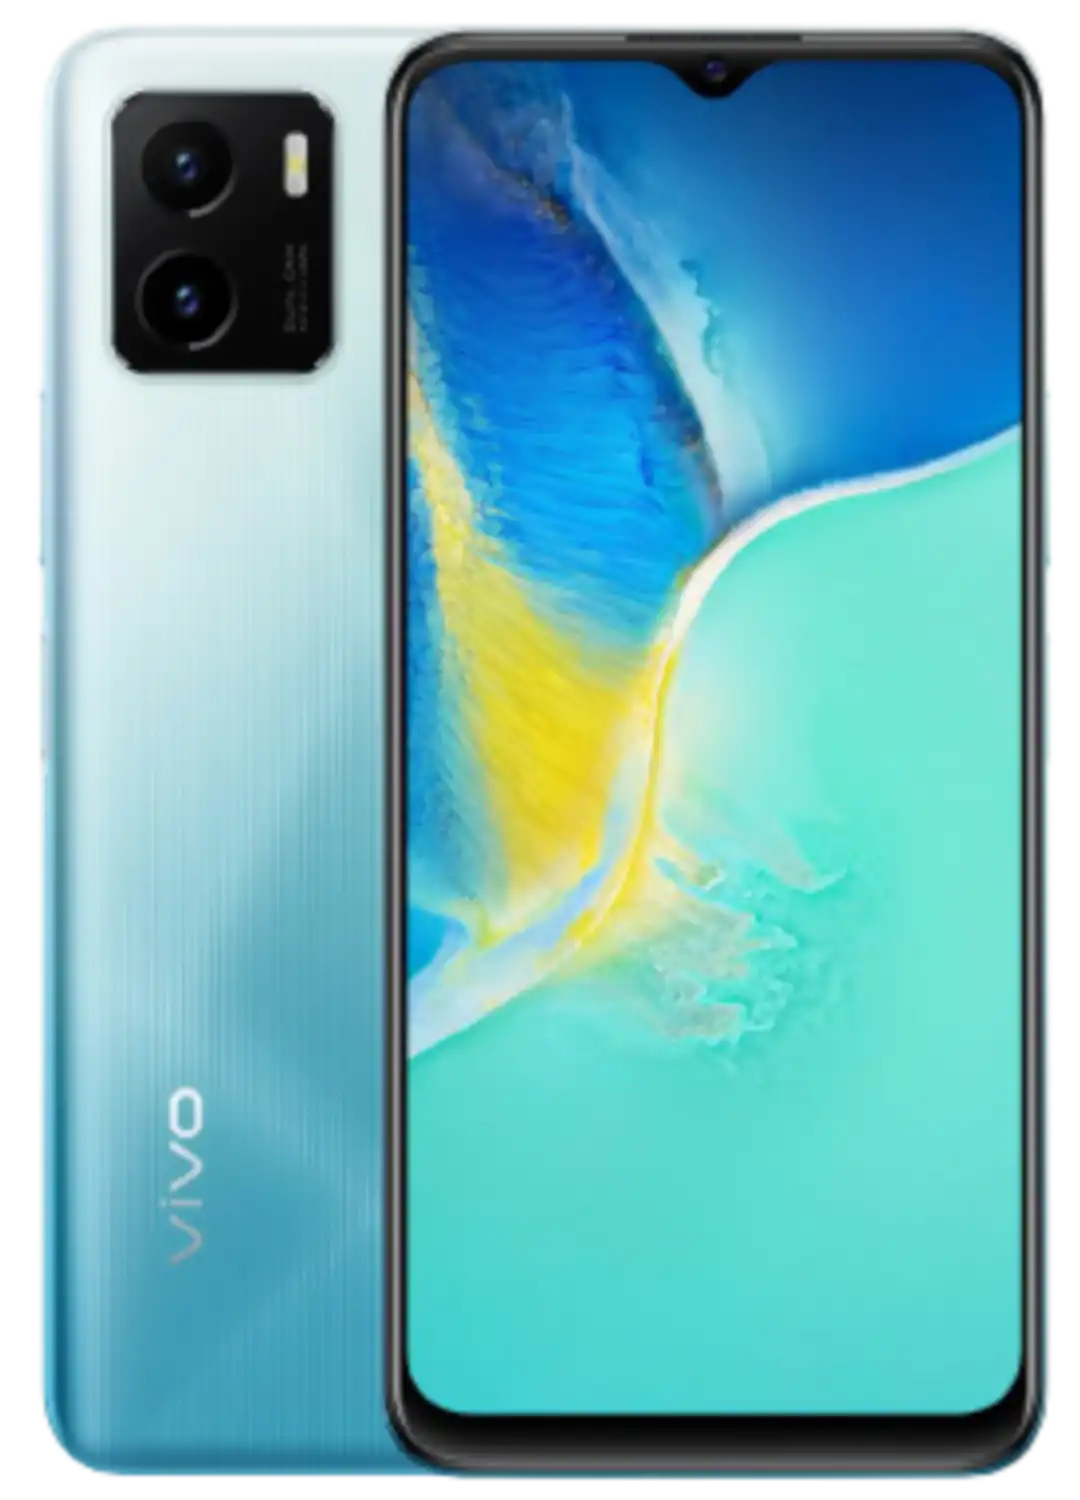 Vivo Y15a – Full Specifications